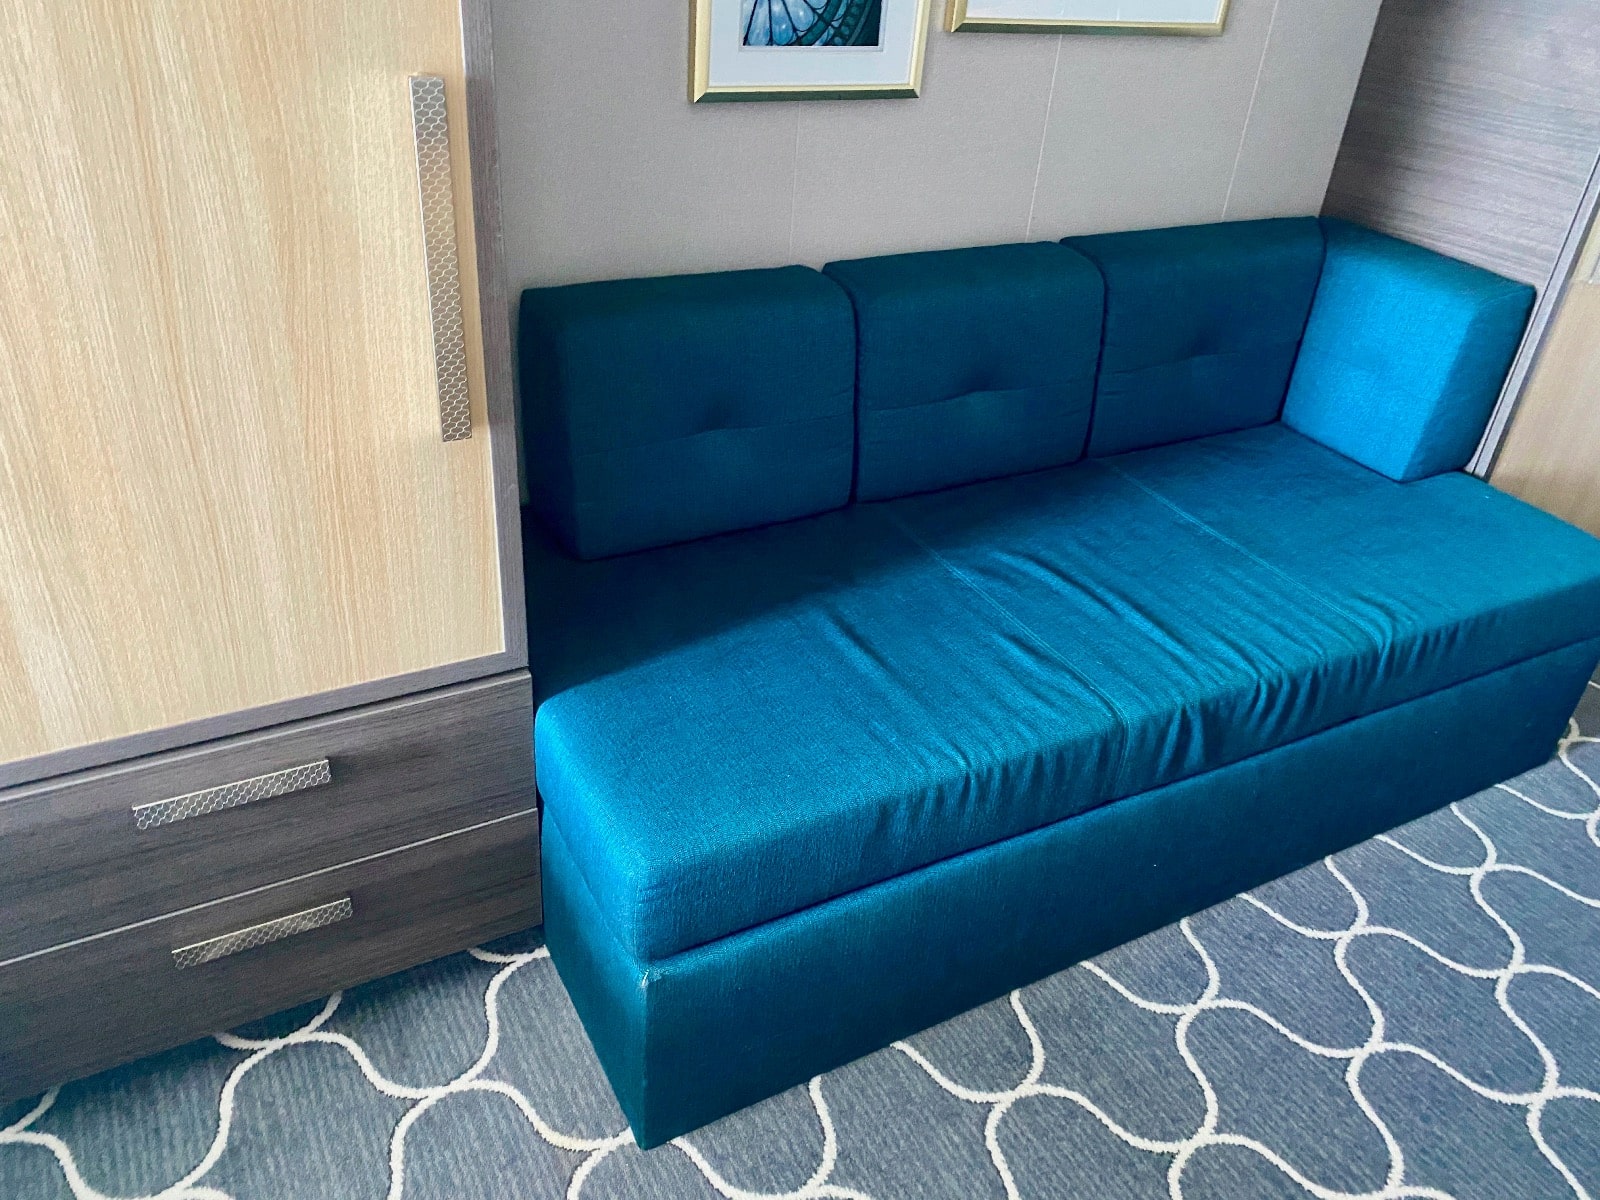 a blue couch in a room